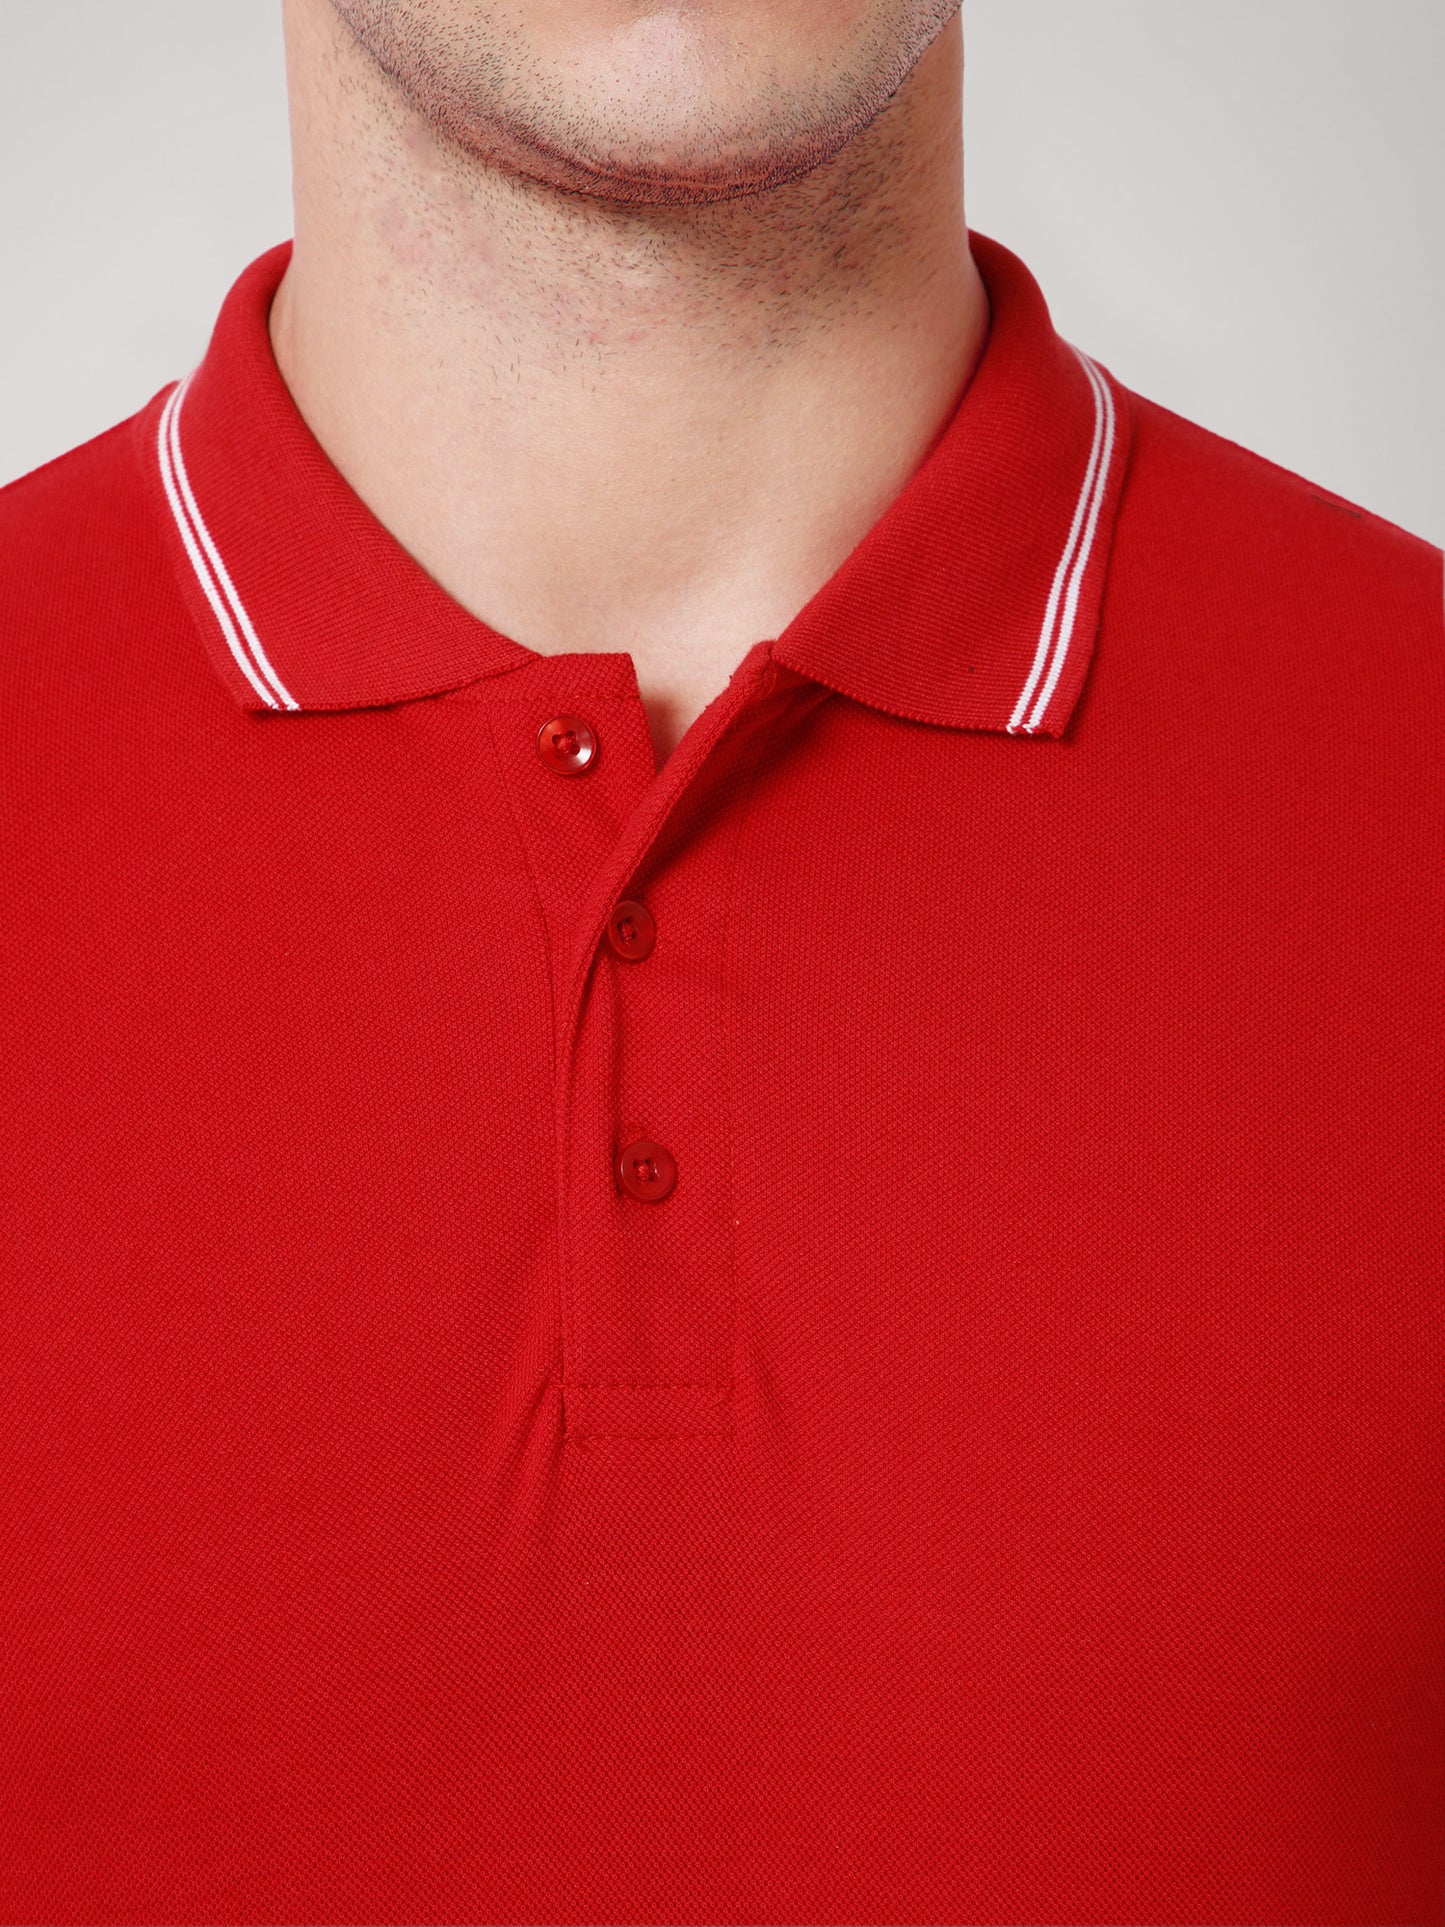 Red Polo T-shirt